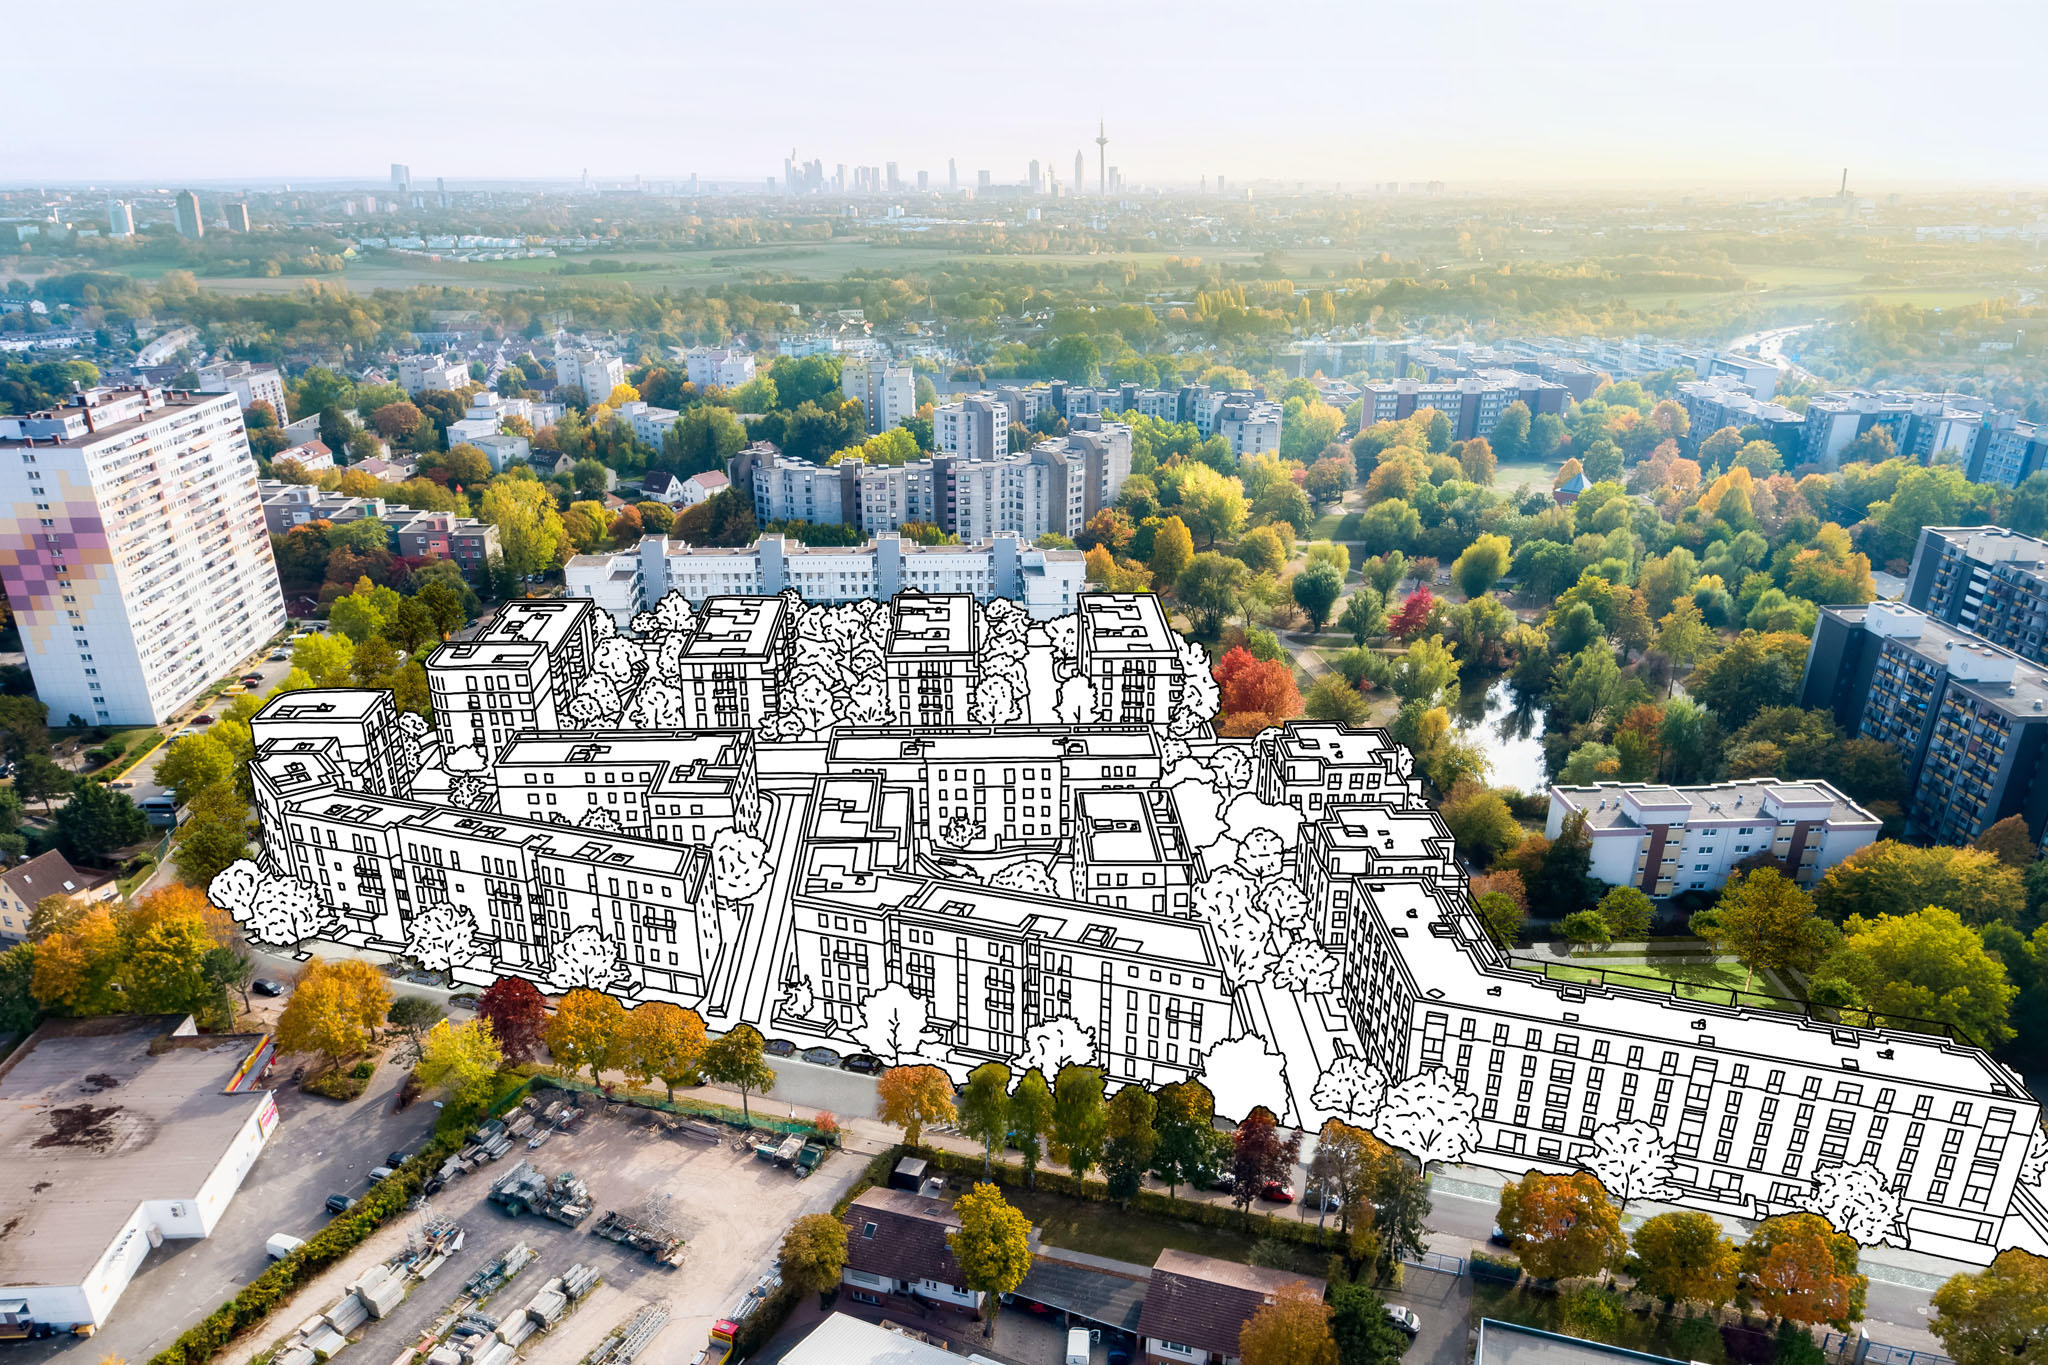 A new residential quarter is emerging on the edge of a larger estate at the northern end of Frankfurt's Ben-Gurion-Ring road. The "Grünhoch2" project is being completed for GWH Wohnungsgesellschaft.